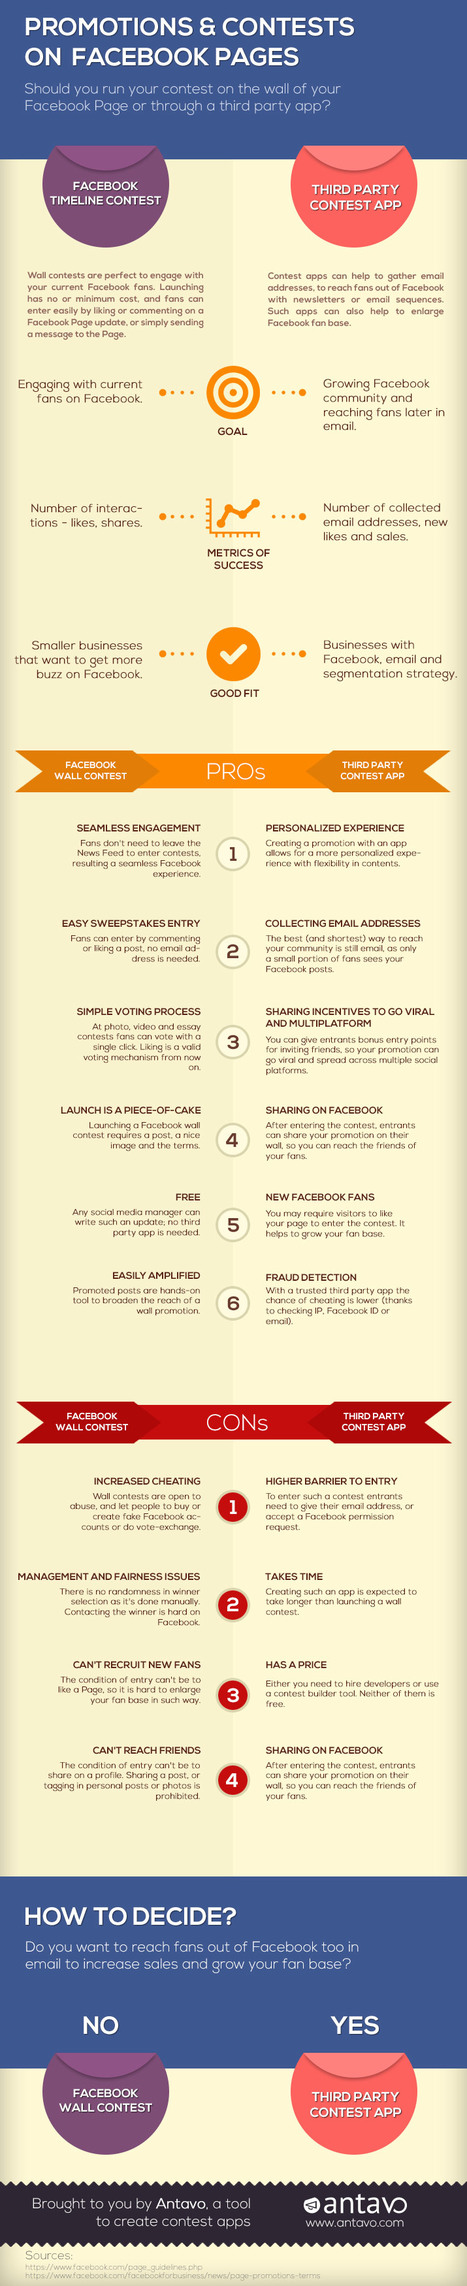 INFOGRAPHIC: Pros And Cons Of Using Third-Party Apps To Create Facebook Promotions | digital marketing strategy | Scoop.it